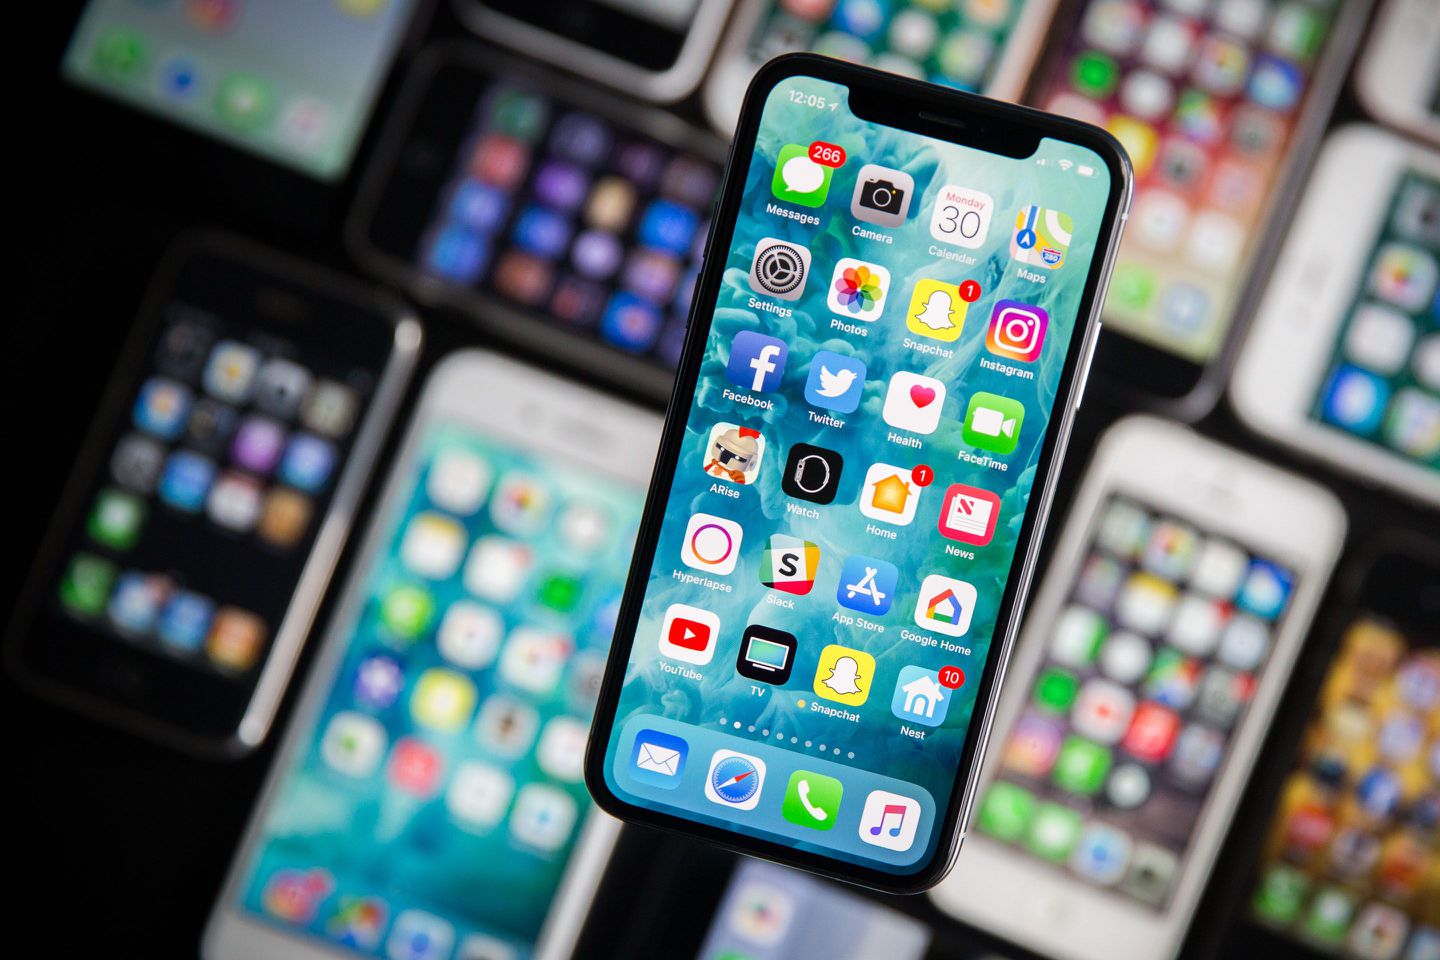 iPhone X review round-up: early opinions on Apple's vision of the future